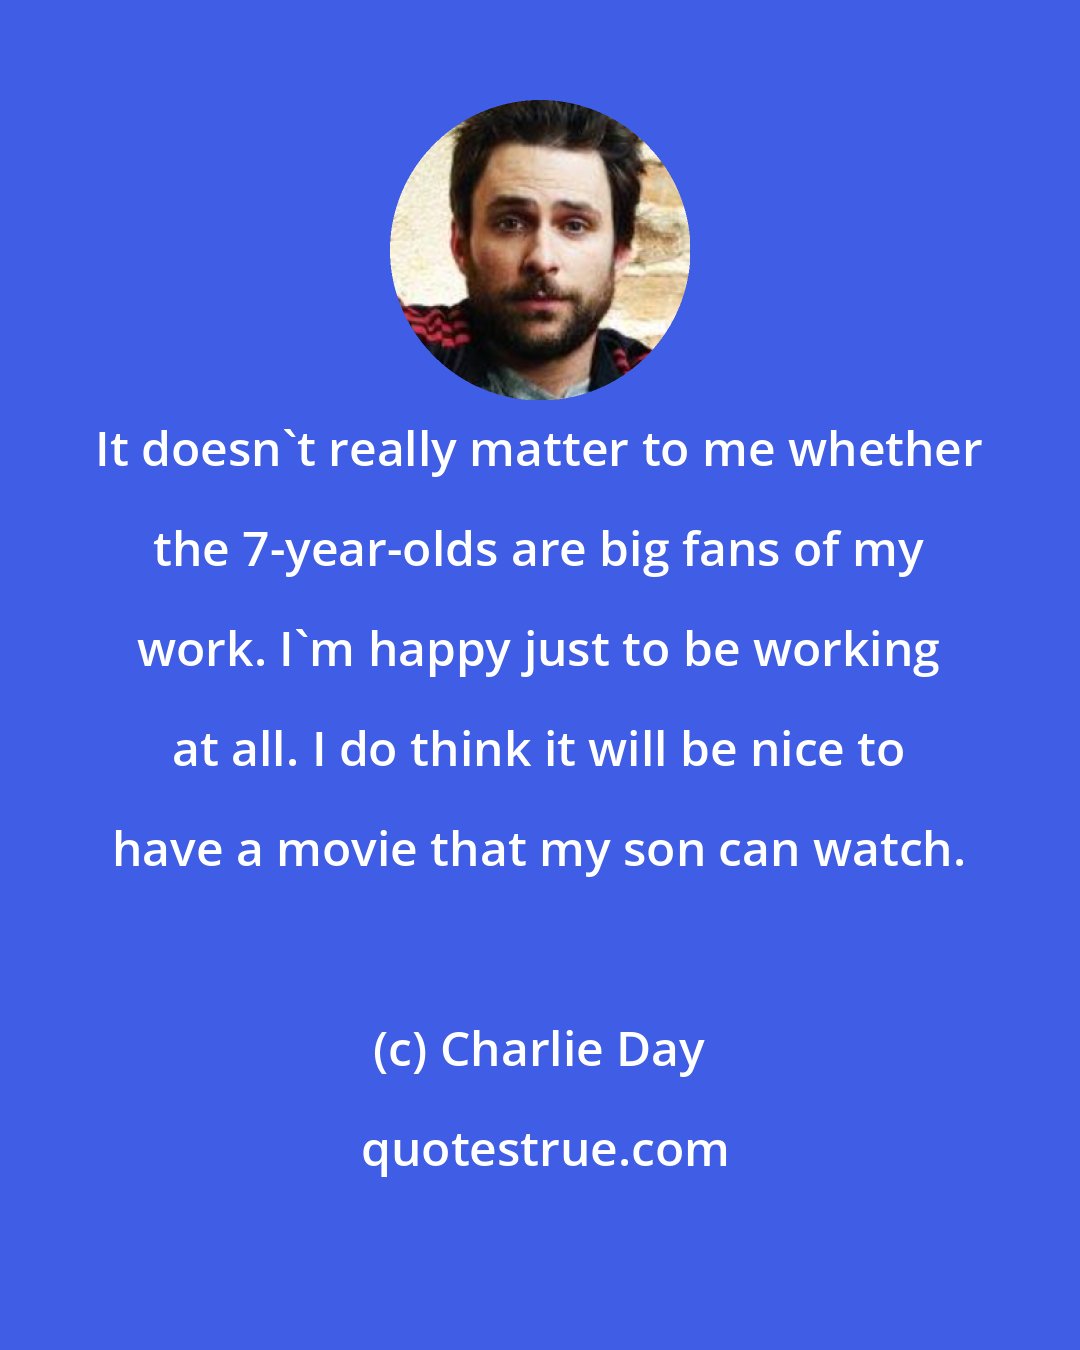 Charlie Day: It doesn't really matter to me whether the 7-year-olds are big fans of my work. I'm happy just to be working at all. I do think it will be nice to have a movie that my son can watch.